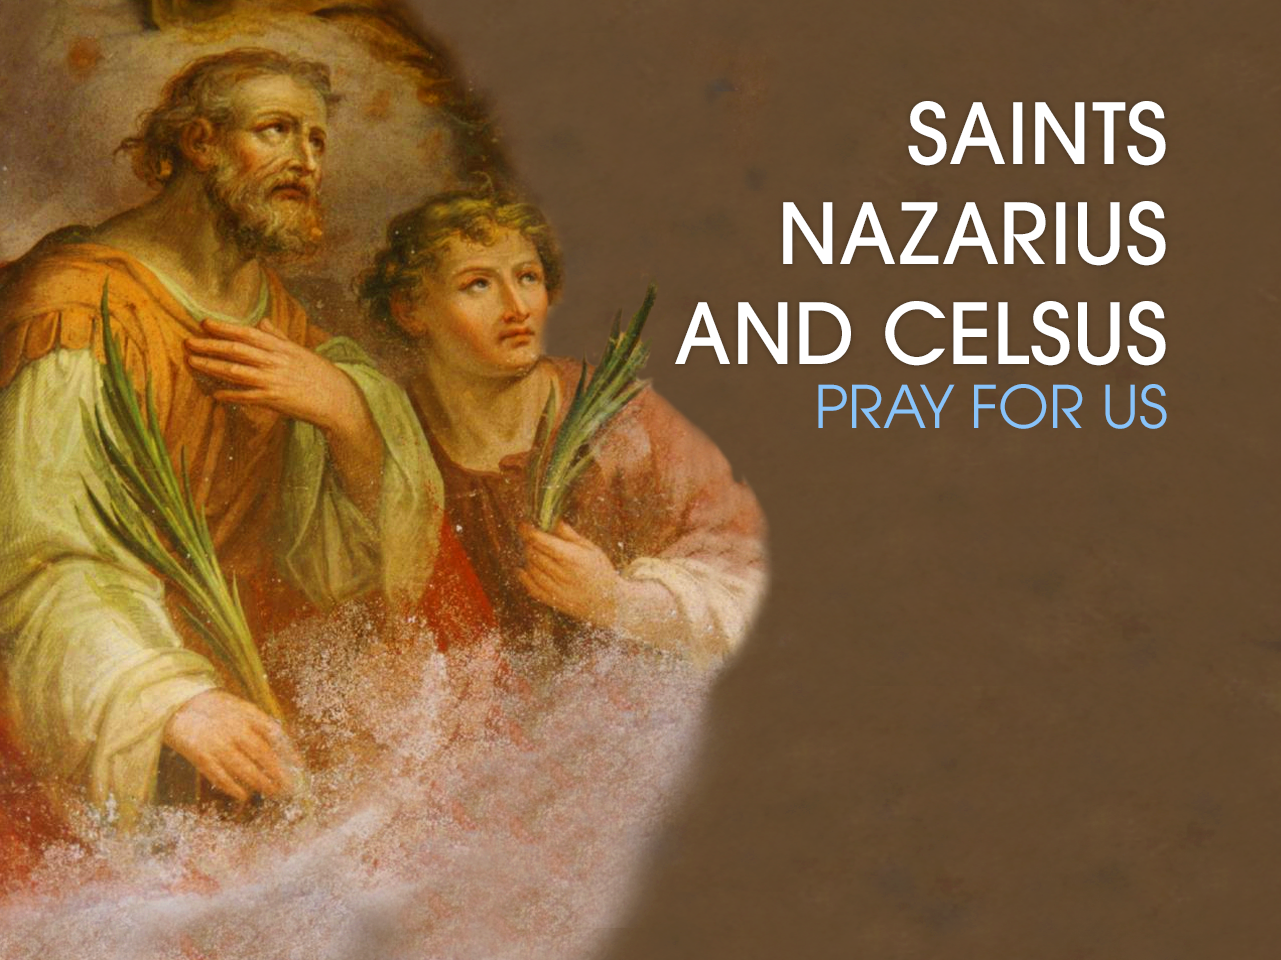 Sts. Nazarius and Celsus